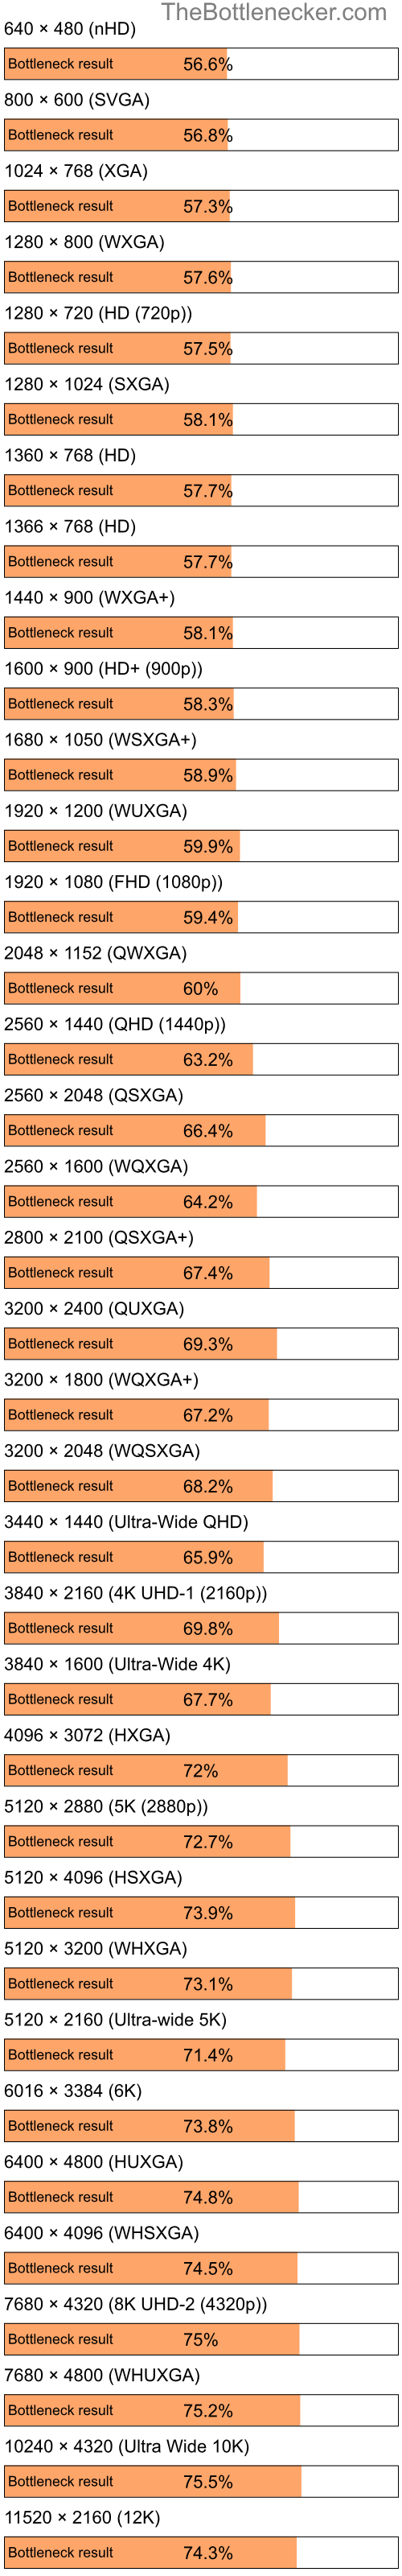 Bottleneck results by resolution for Intel Atom N280 and AMD M880G with Mobility Radeon HD 4200 in Processor Intense Tasks